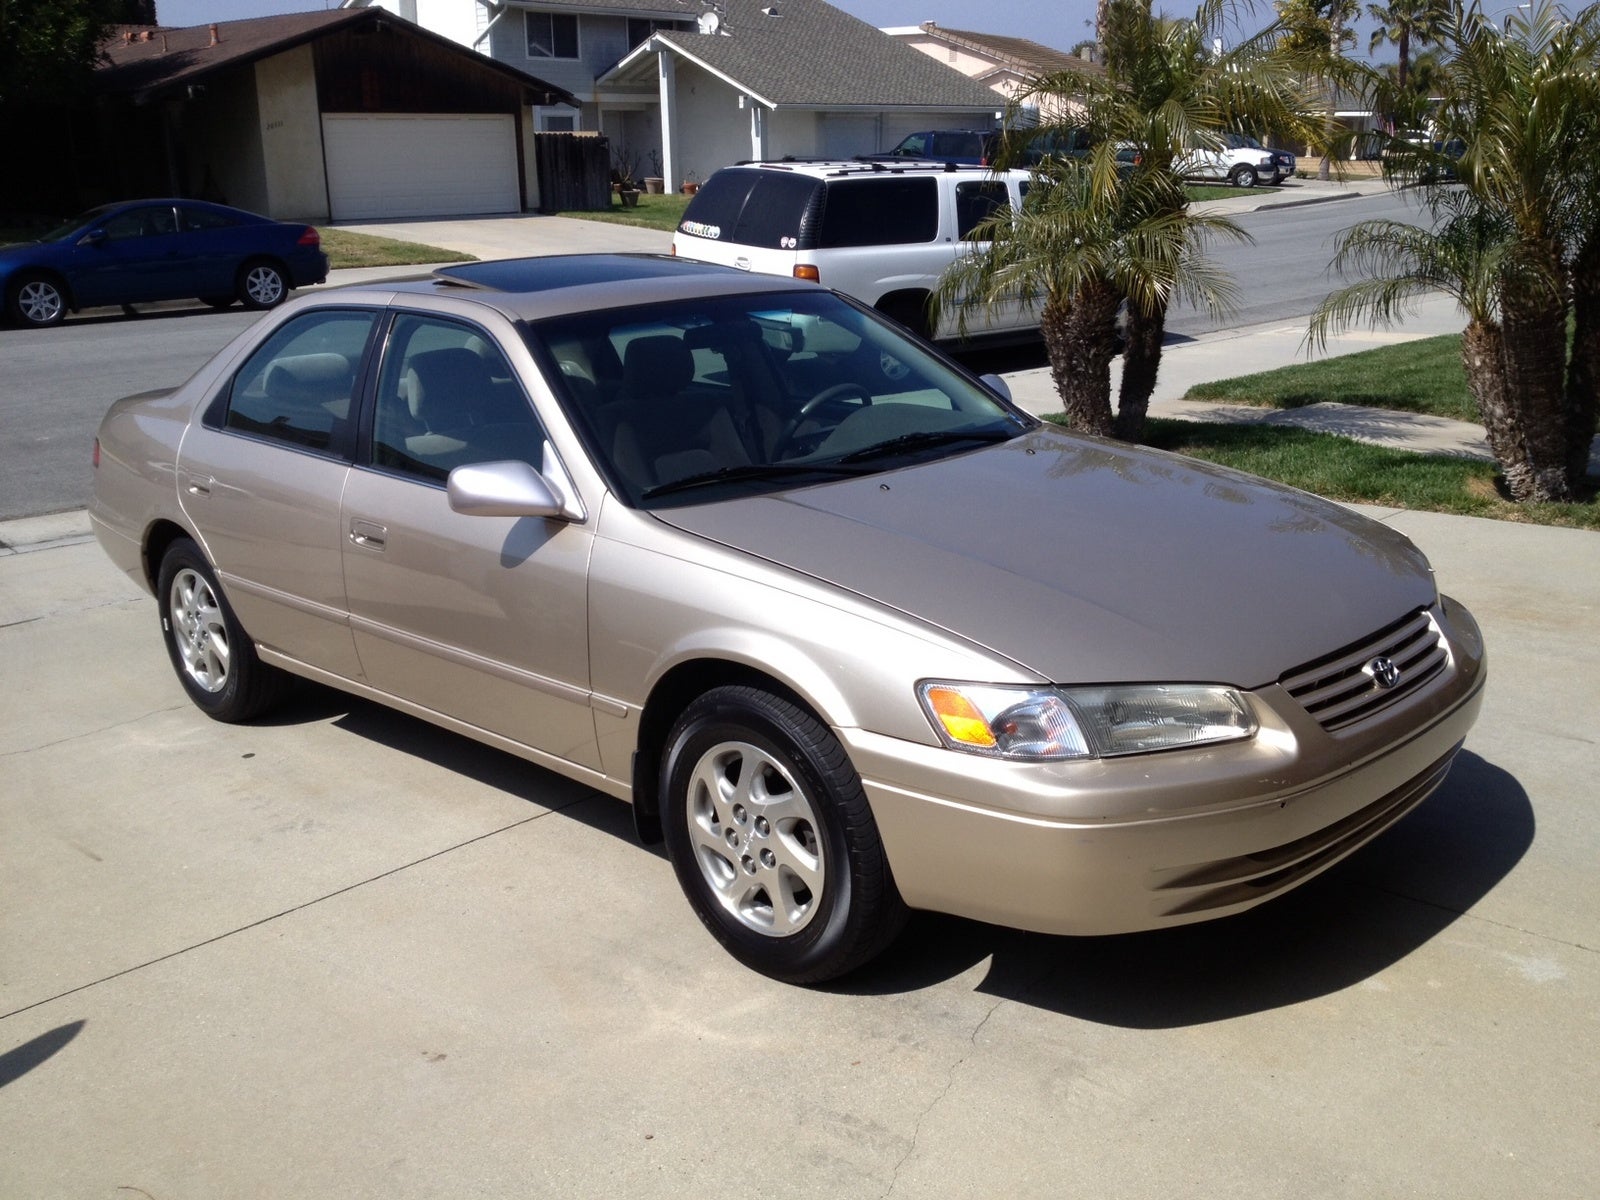 1998 toyota camry le blue book #3